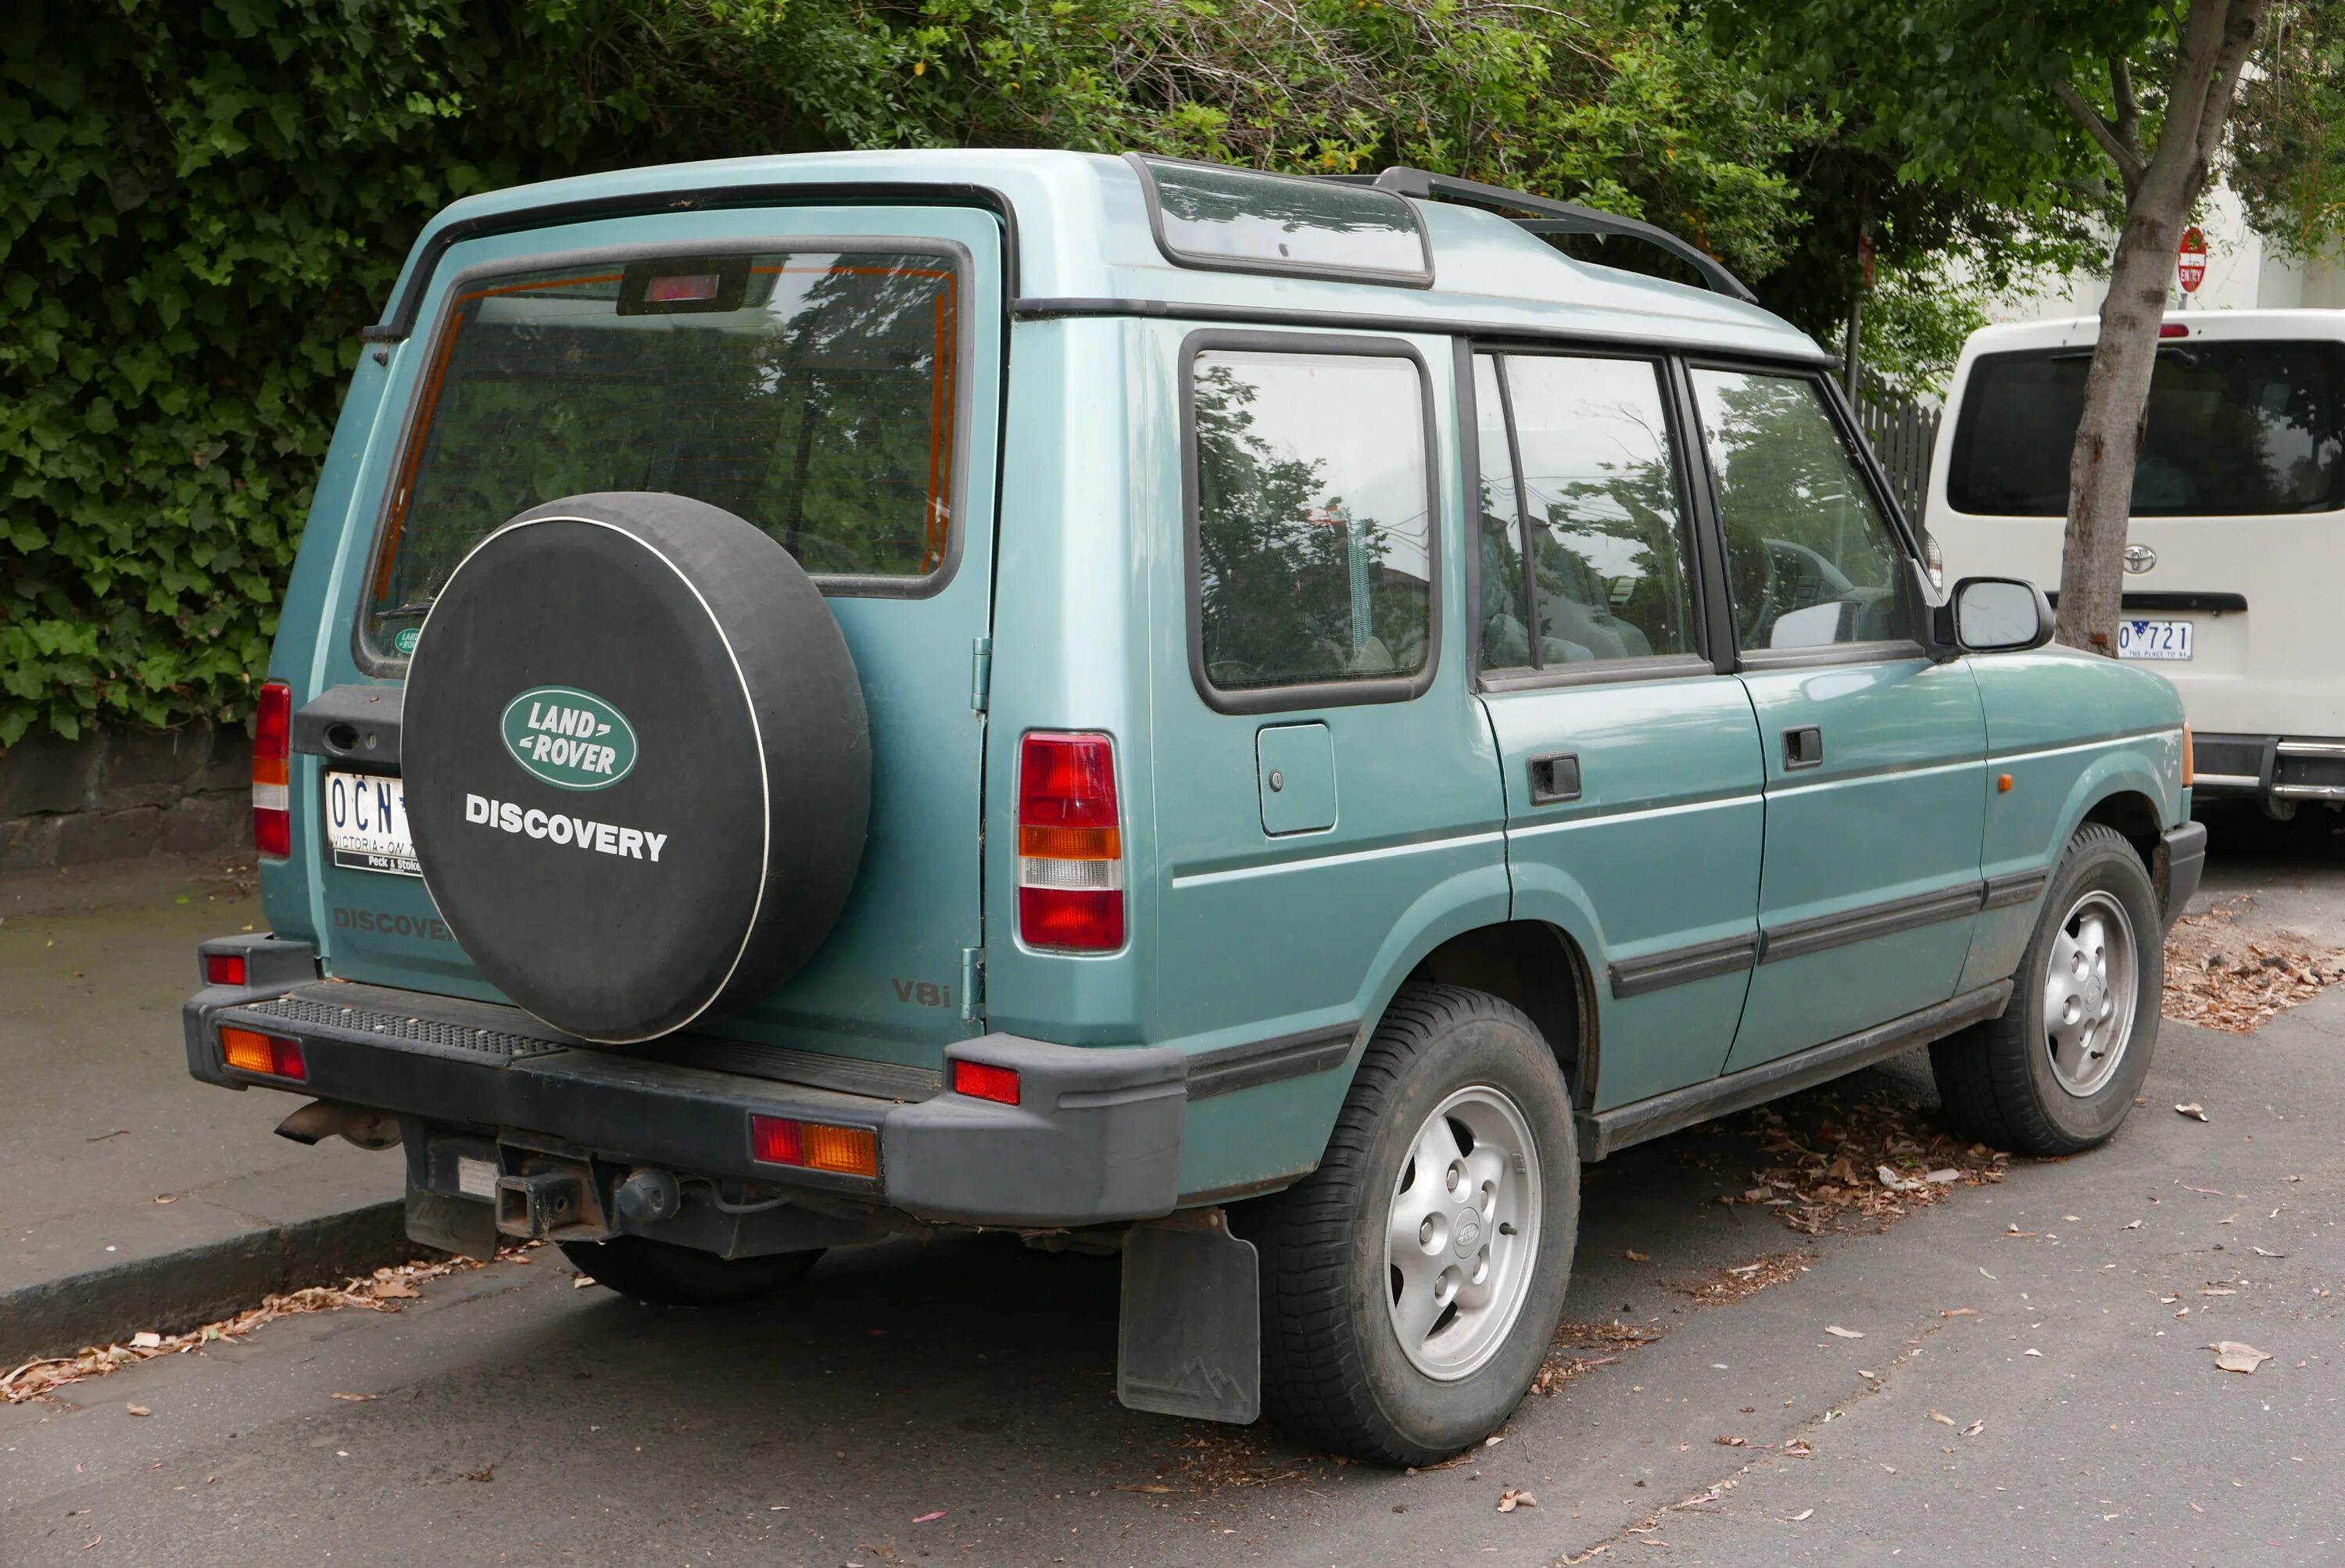 Discovery 1 8. Land Rover Discovery 1996. Ленд Ровер 1996. Ленд Ровер 1996г. Rover 1996.